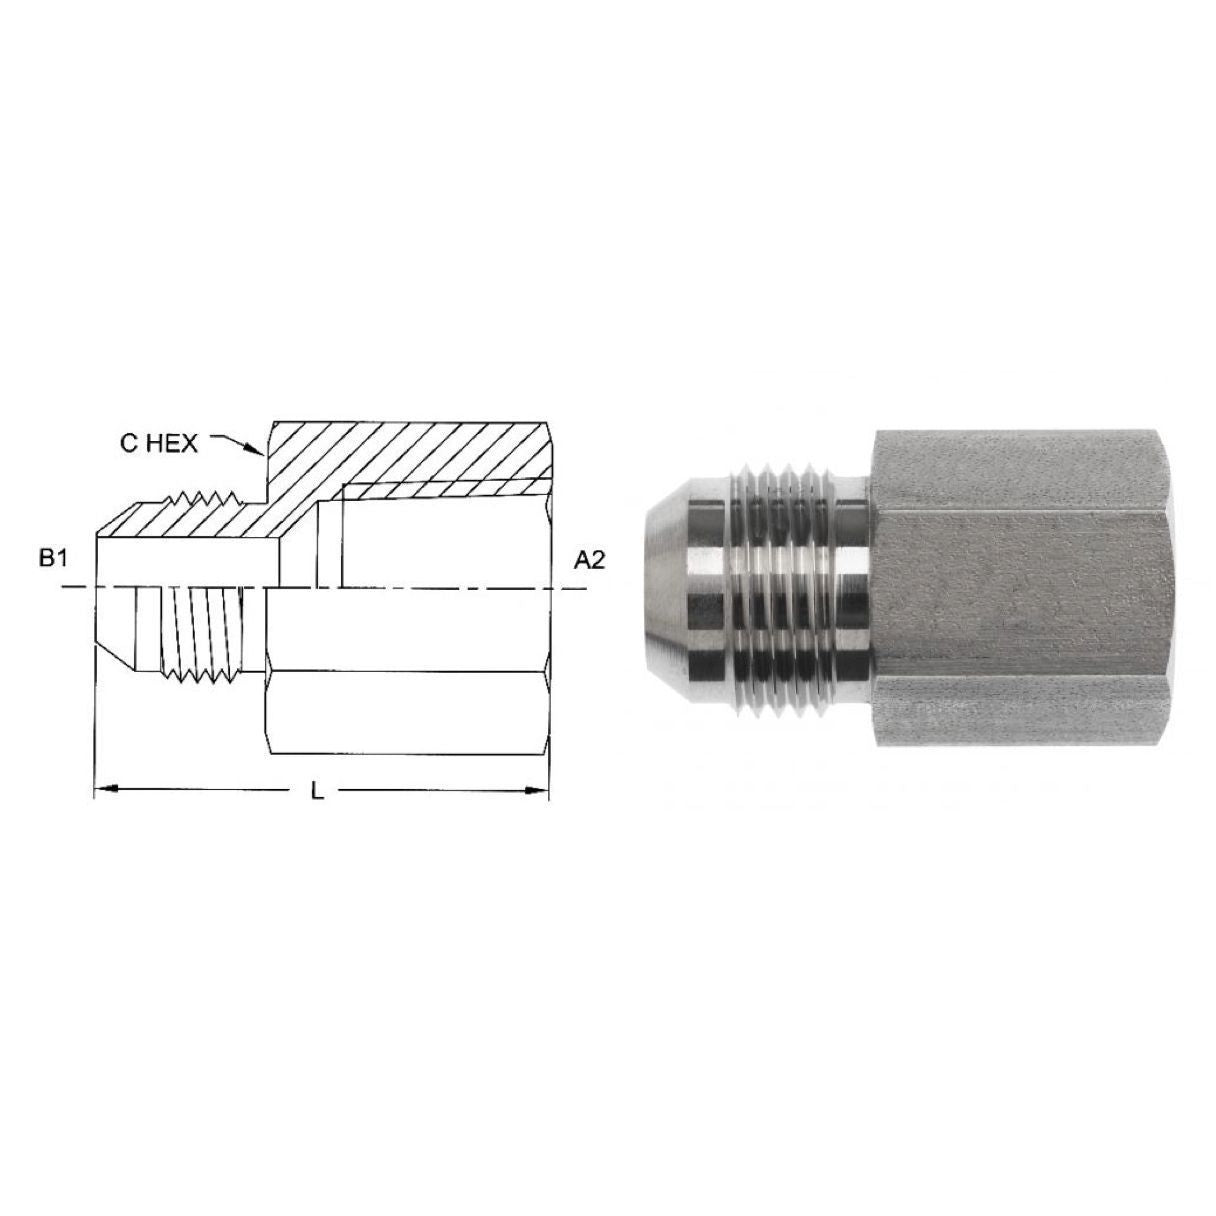 2405-24-24 : OneHydraulics  Adapter, Straight, 1.5 (1-1/2") Male NPT x 1.5 (1-1/2") Female, Steel, 2000psi